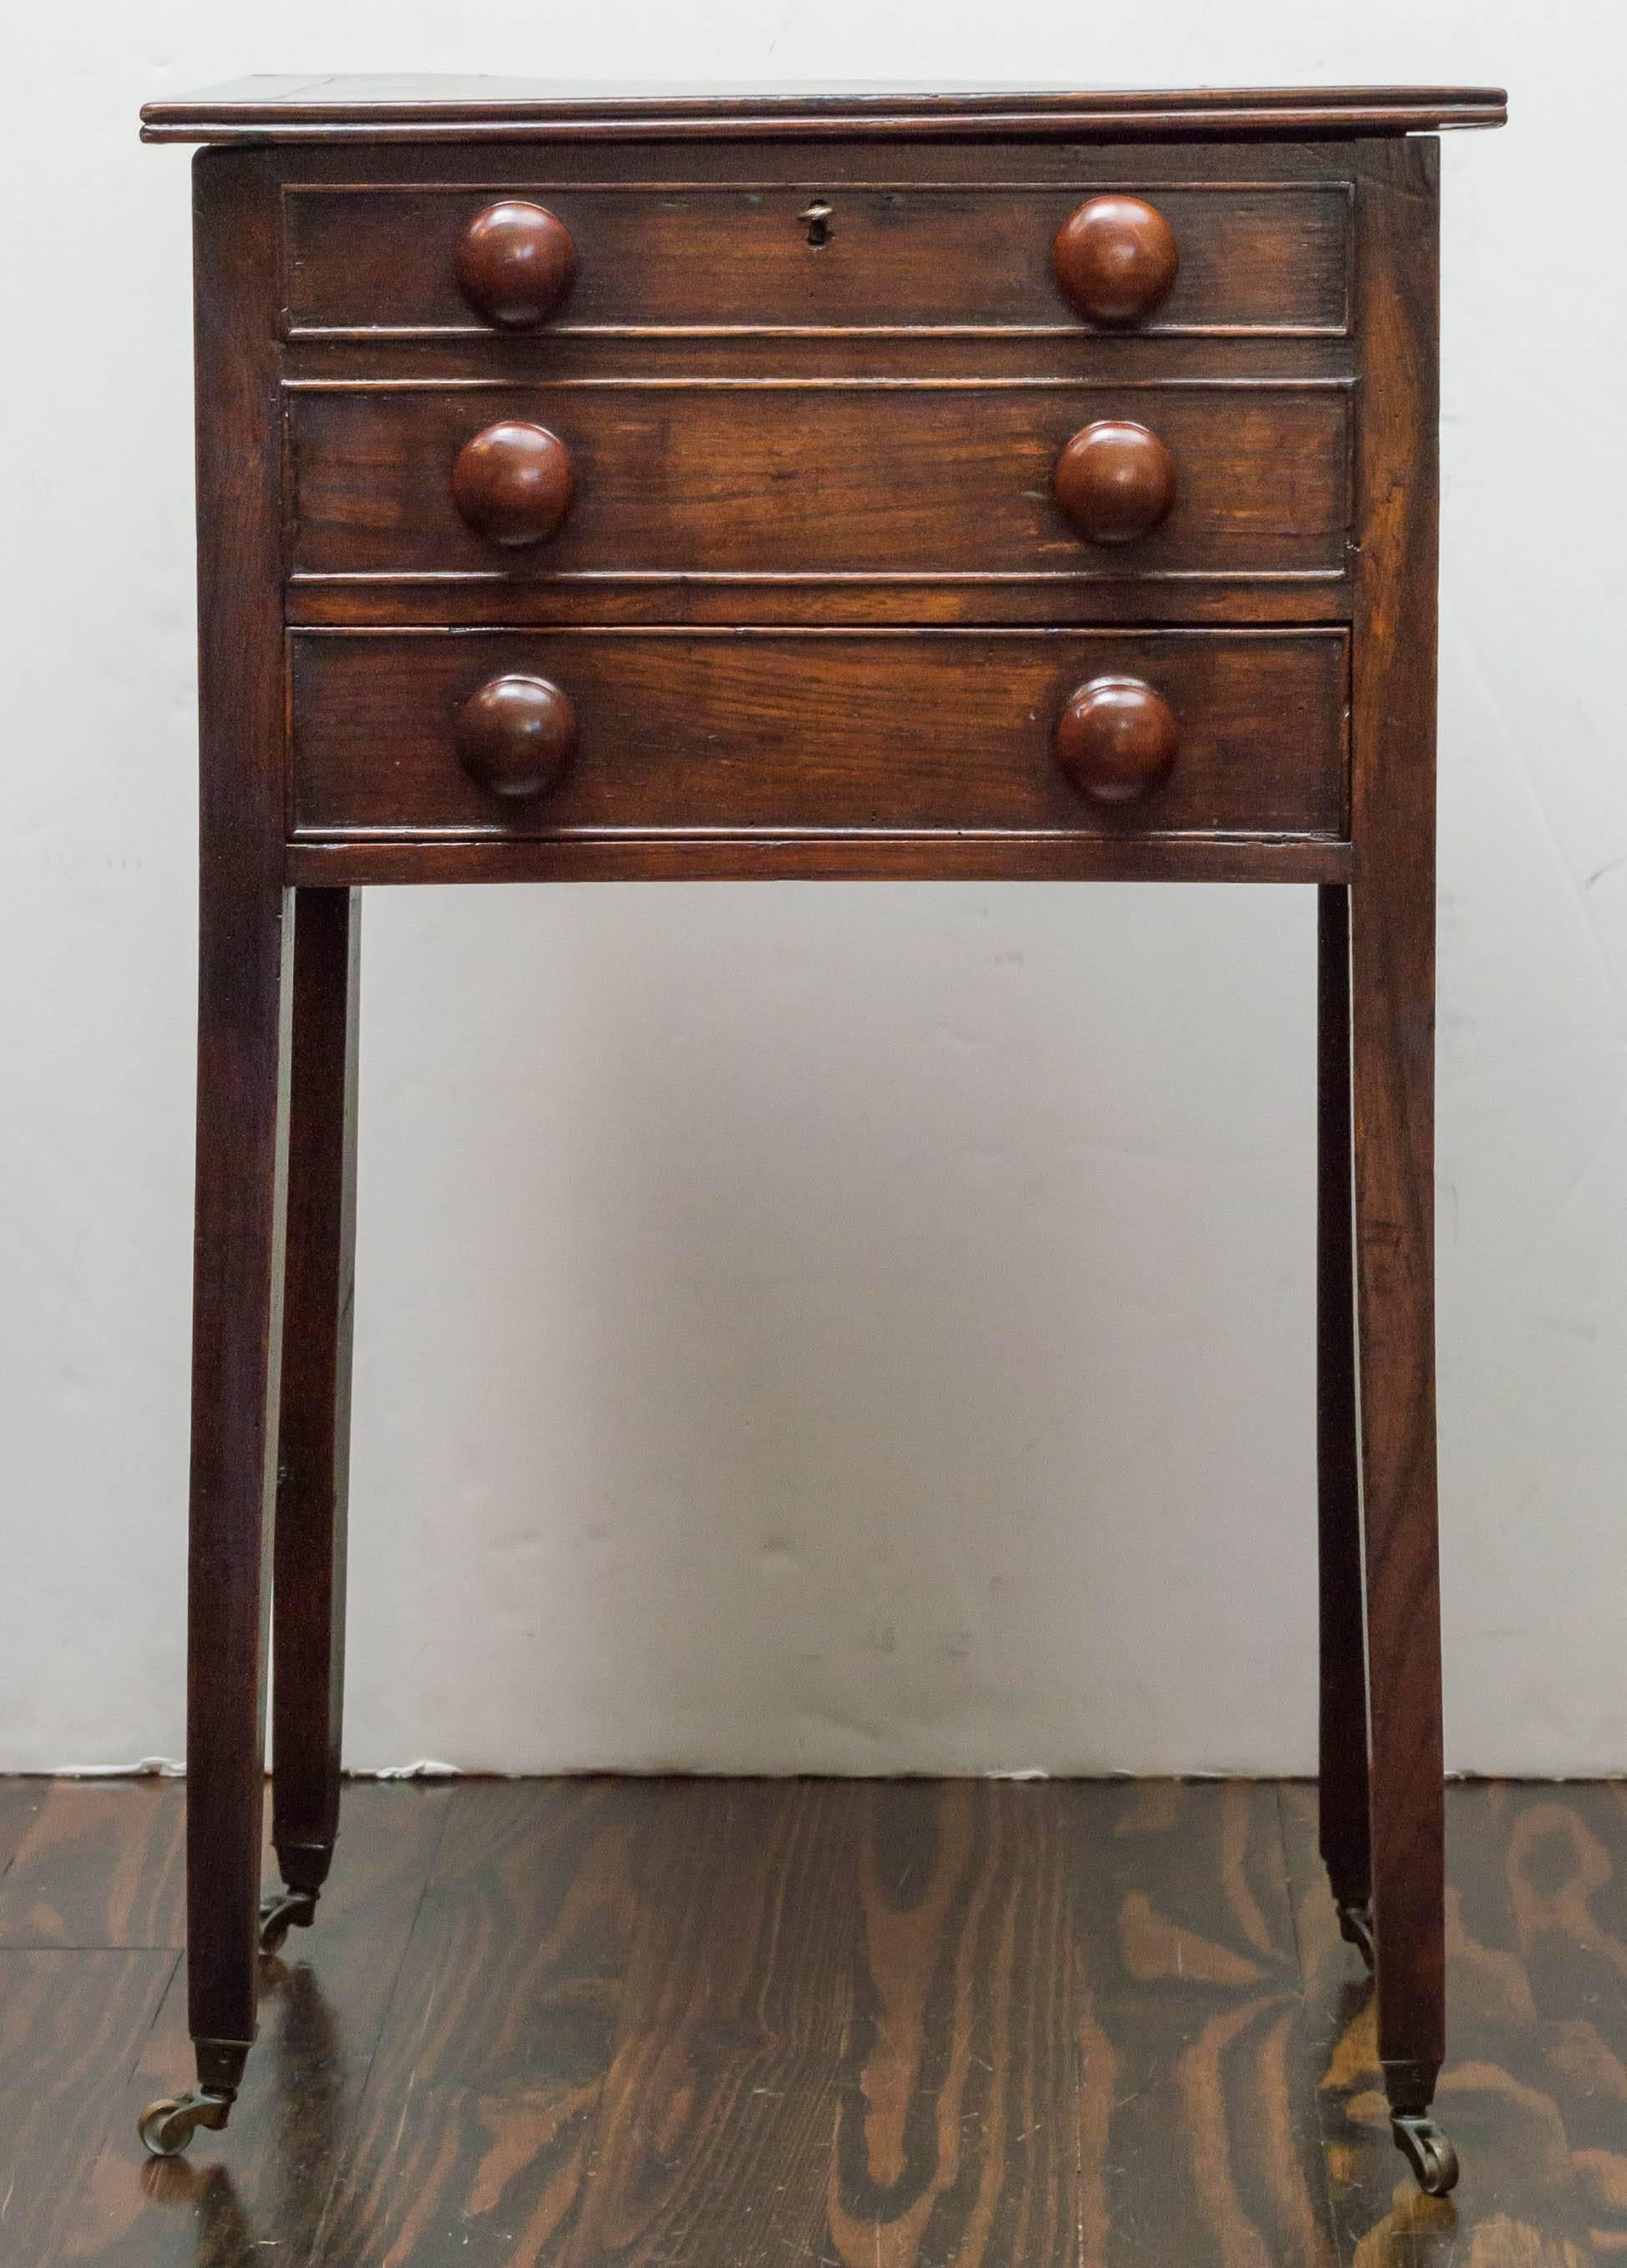 Late 18th century Georgian oak side table / stand. Perched on petite brass casters of a later date. Interesting locking bin top with a drawer below. Retains the original turned wood knobs. Deep color / undisturbed surface brought up by wax. Very